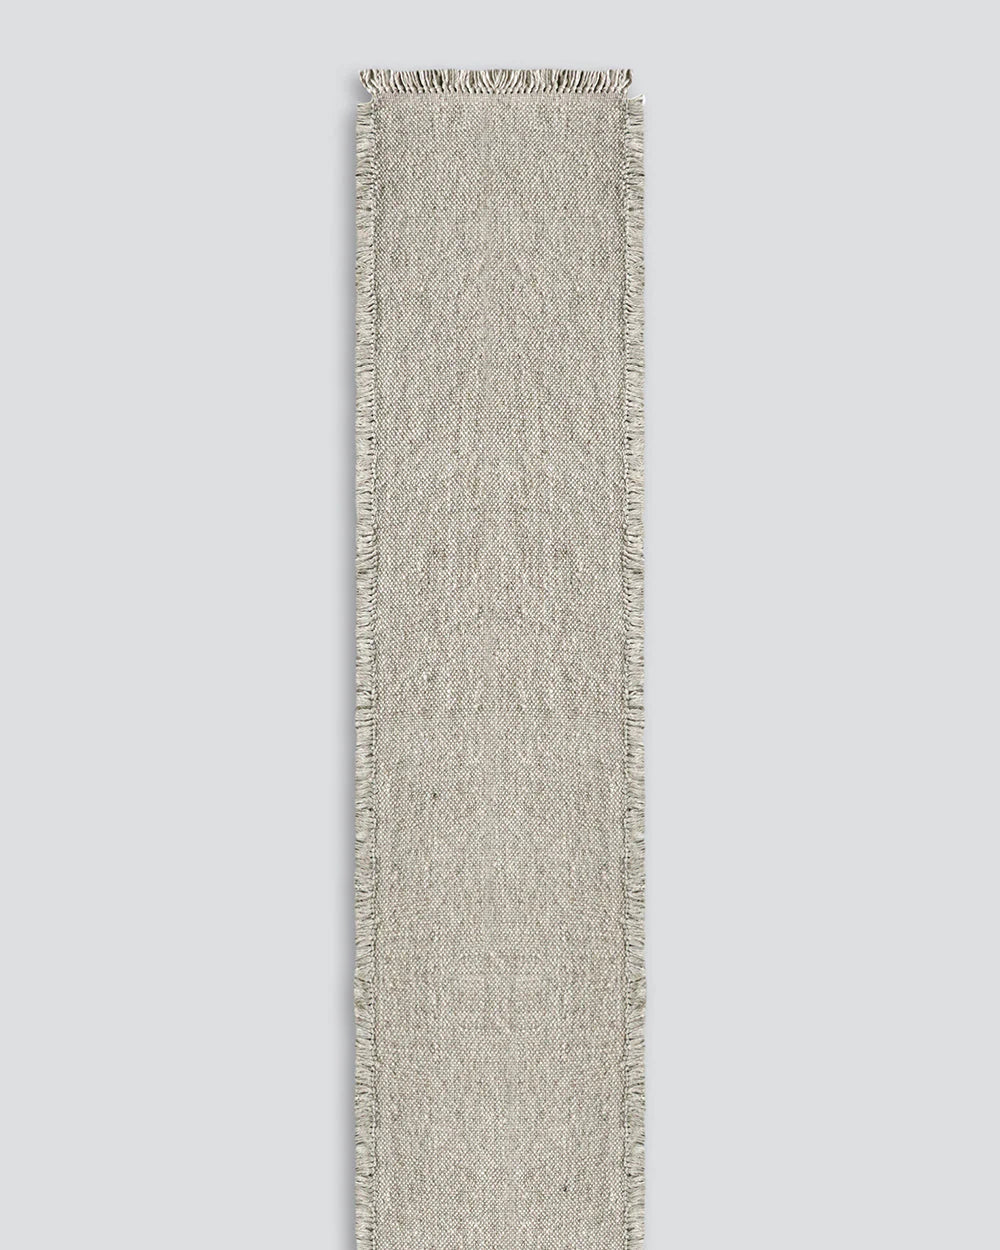 Ulster Taupe Natural Floor Runner from Baya Furtex Stockist Make Your House A Home, Furniture Store Bendigo. Free Australia Wide Delivery. Mulberi Rugs.